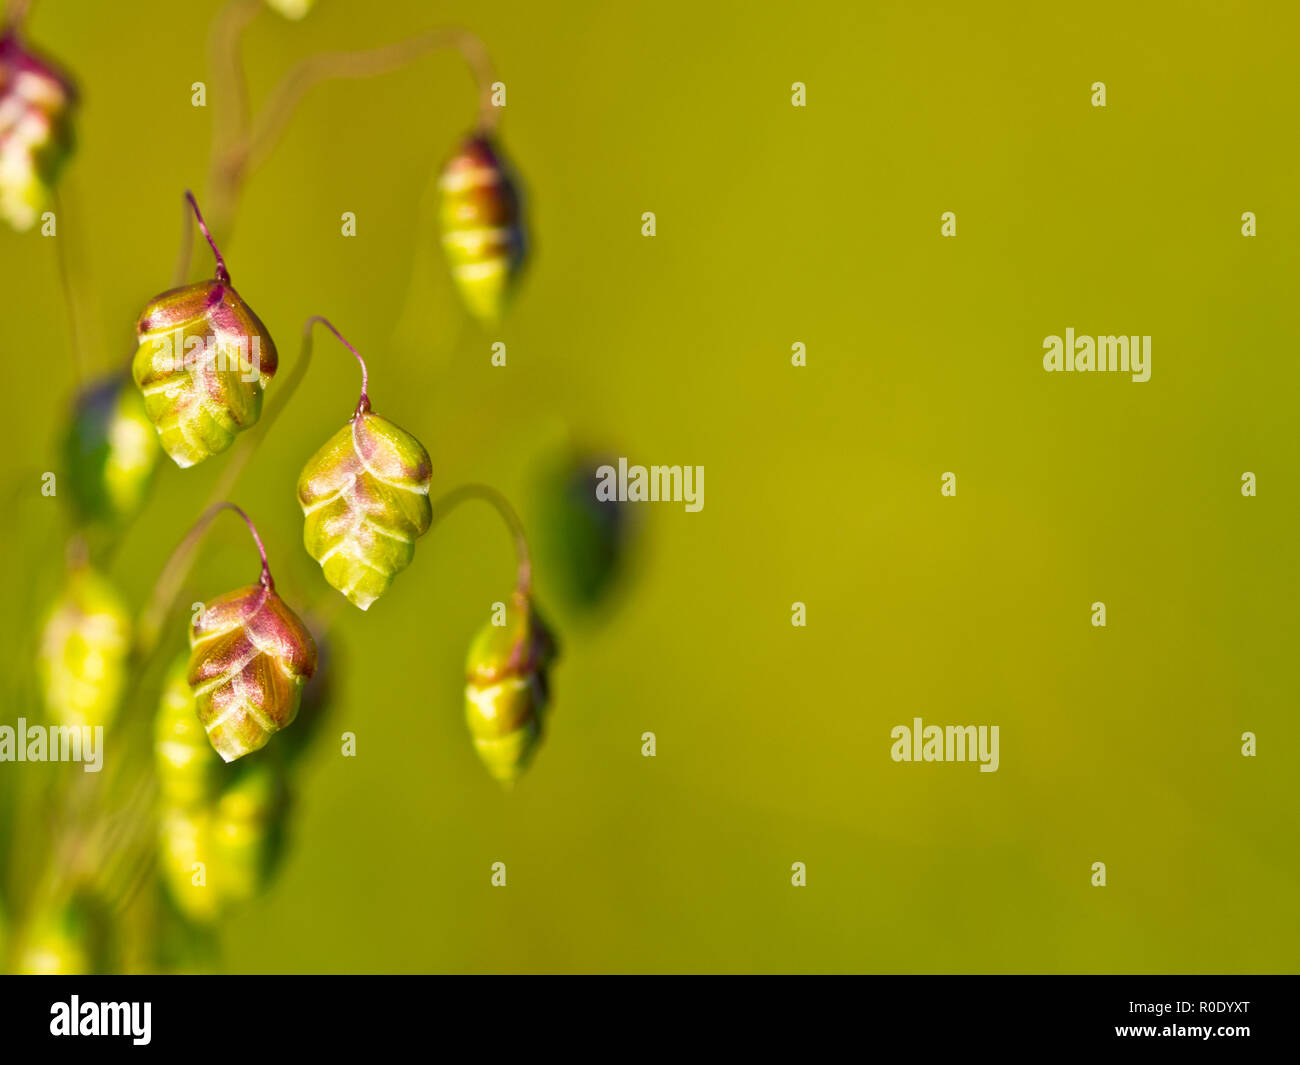 Quaking grass (Briza media) with green background Stock Photo